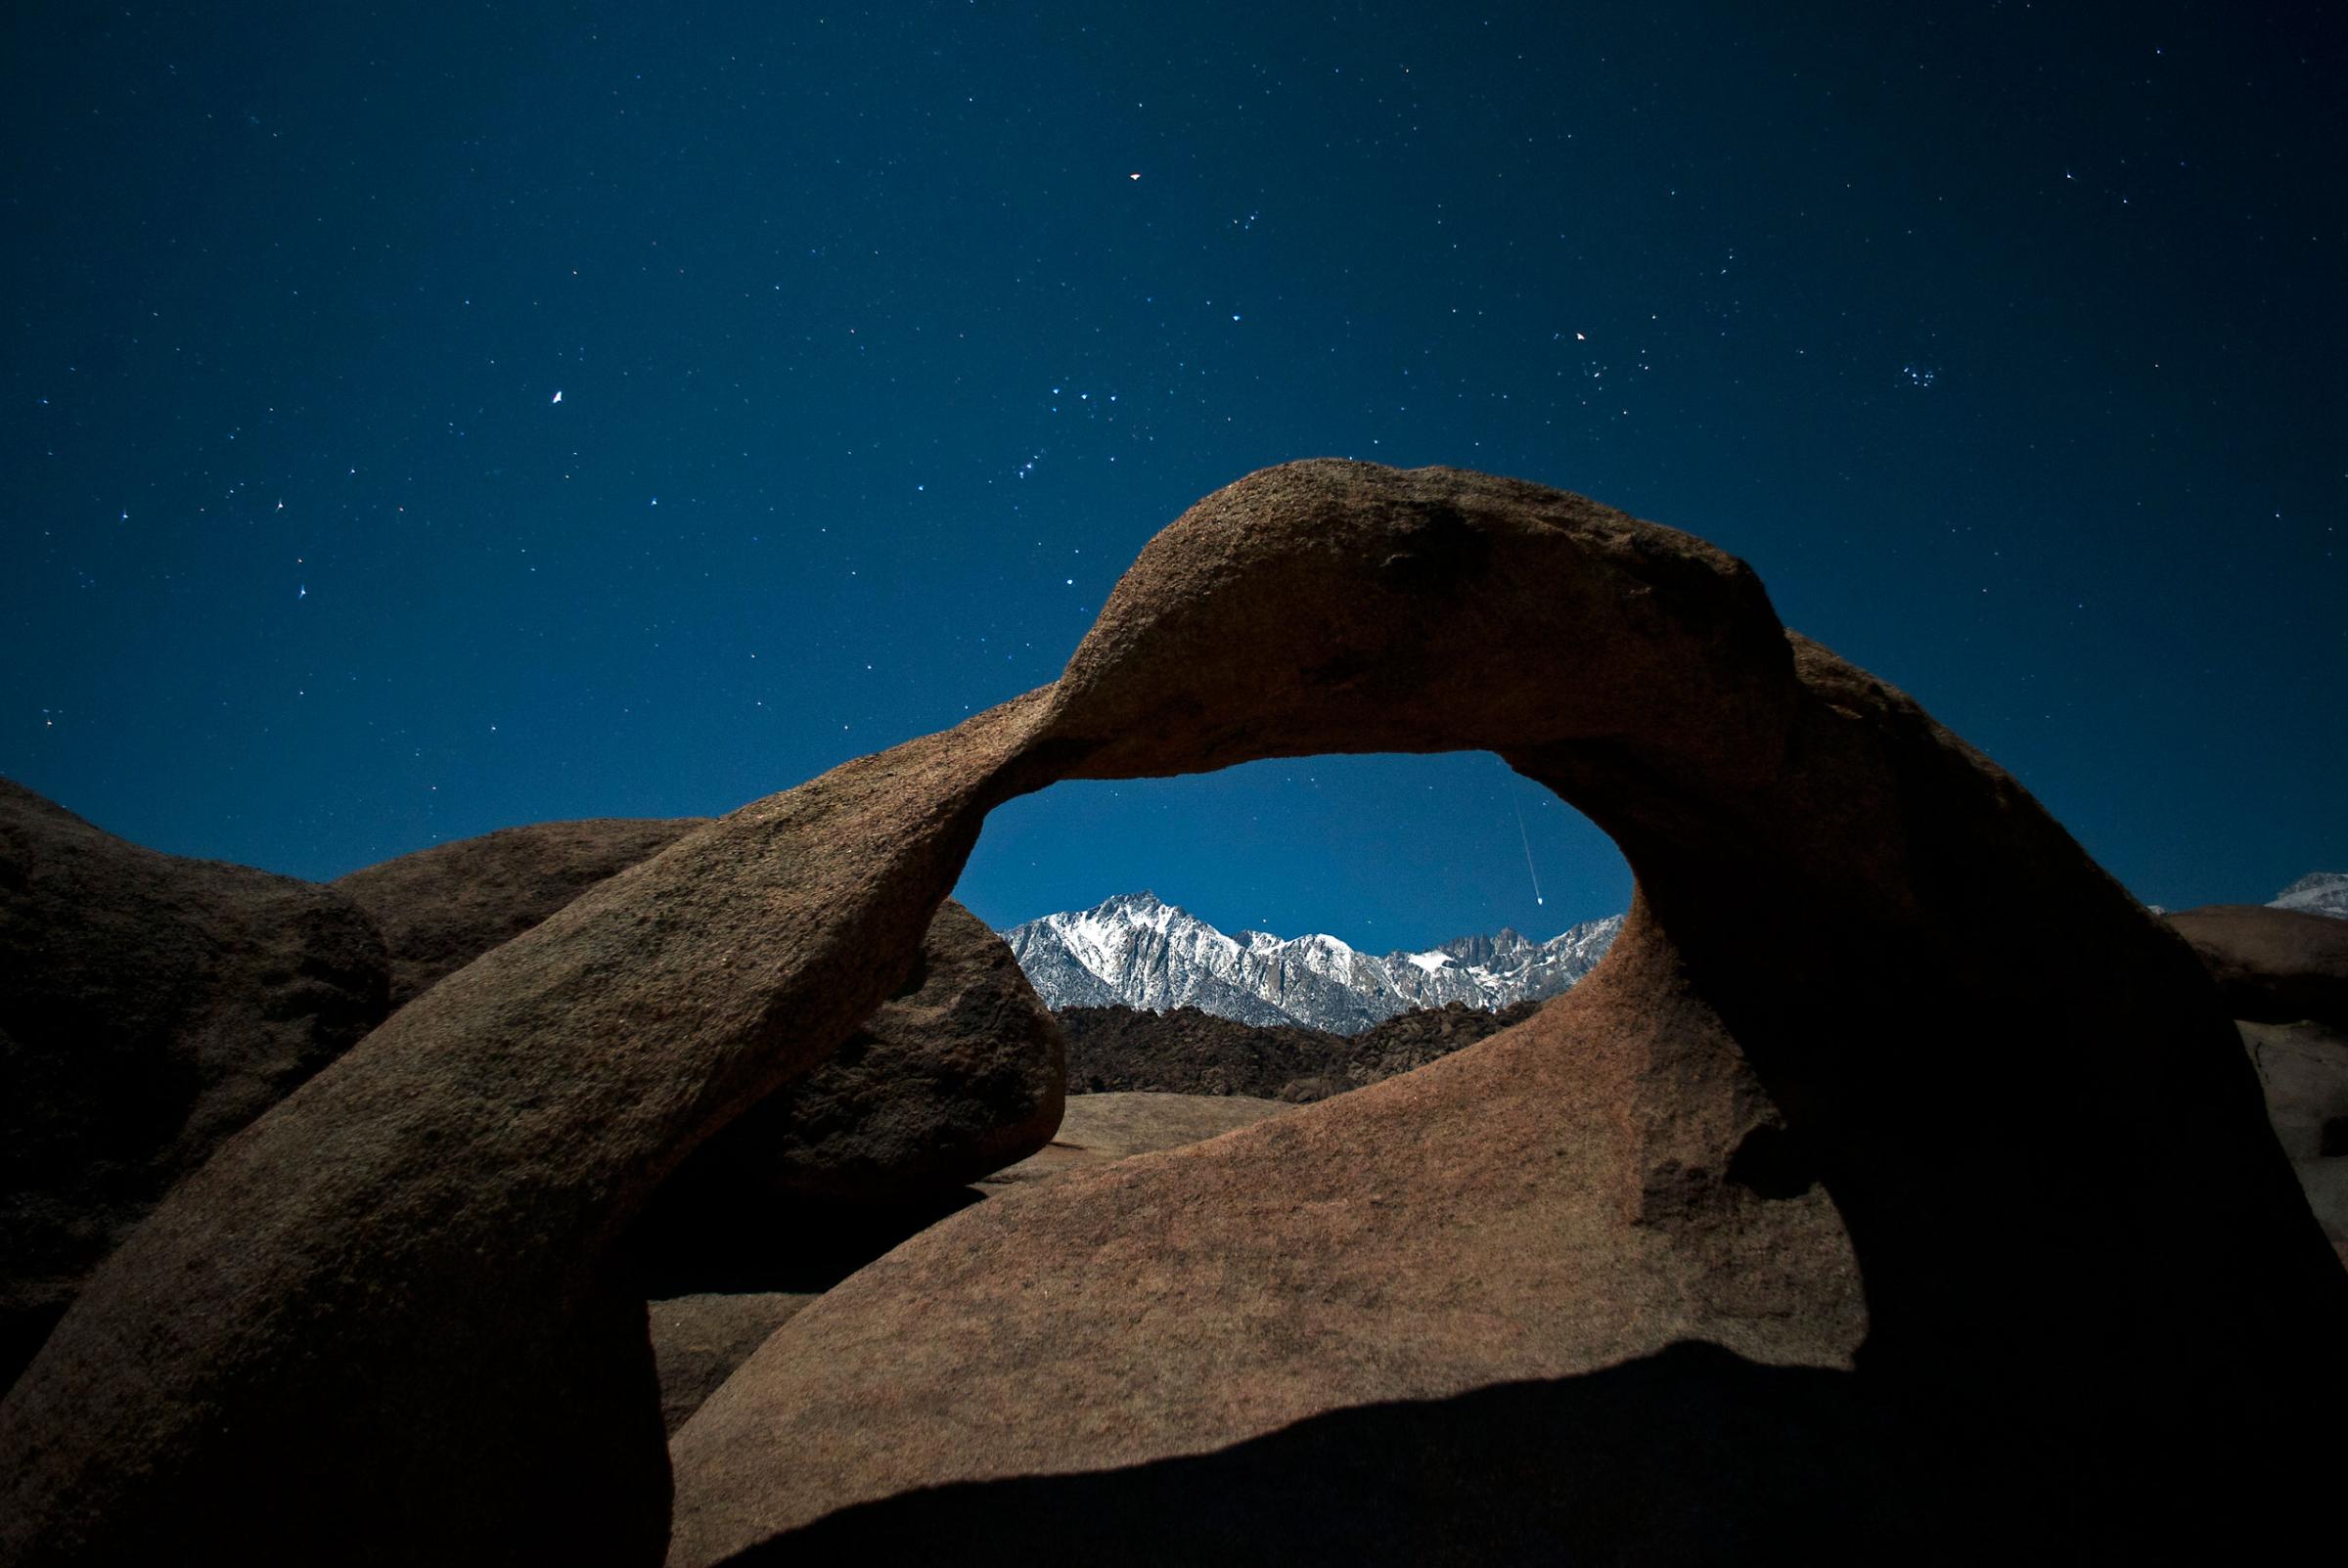 Framed within Mobuis Arch, a Geminid meteor streaks through a starfilled sky above the Sierra Nevada mountains in California's Eastern Sierra on Dec. 14, 2011.